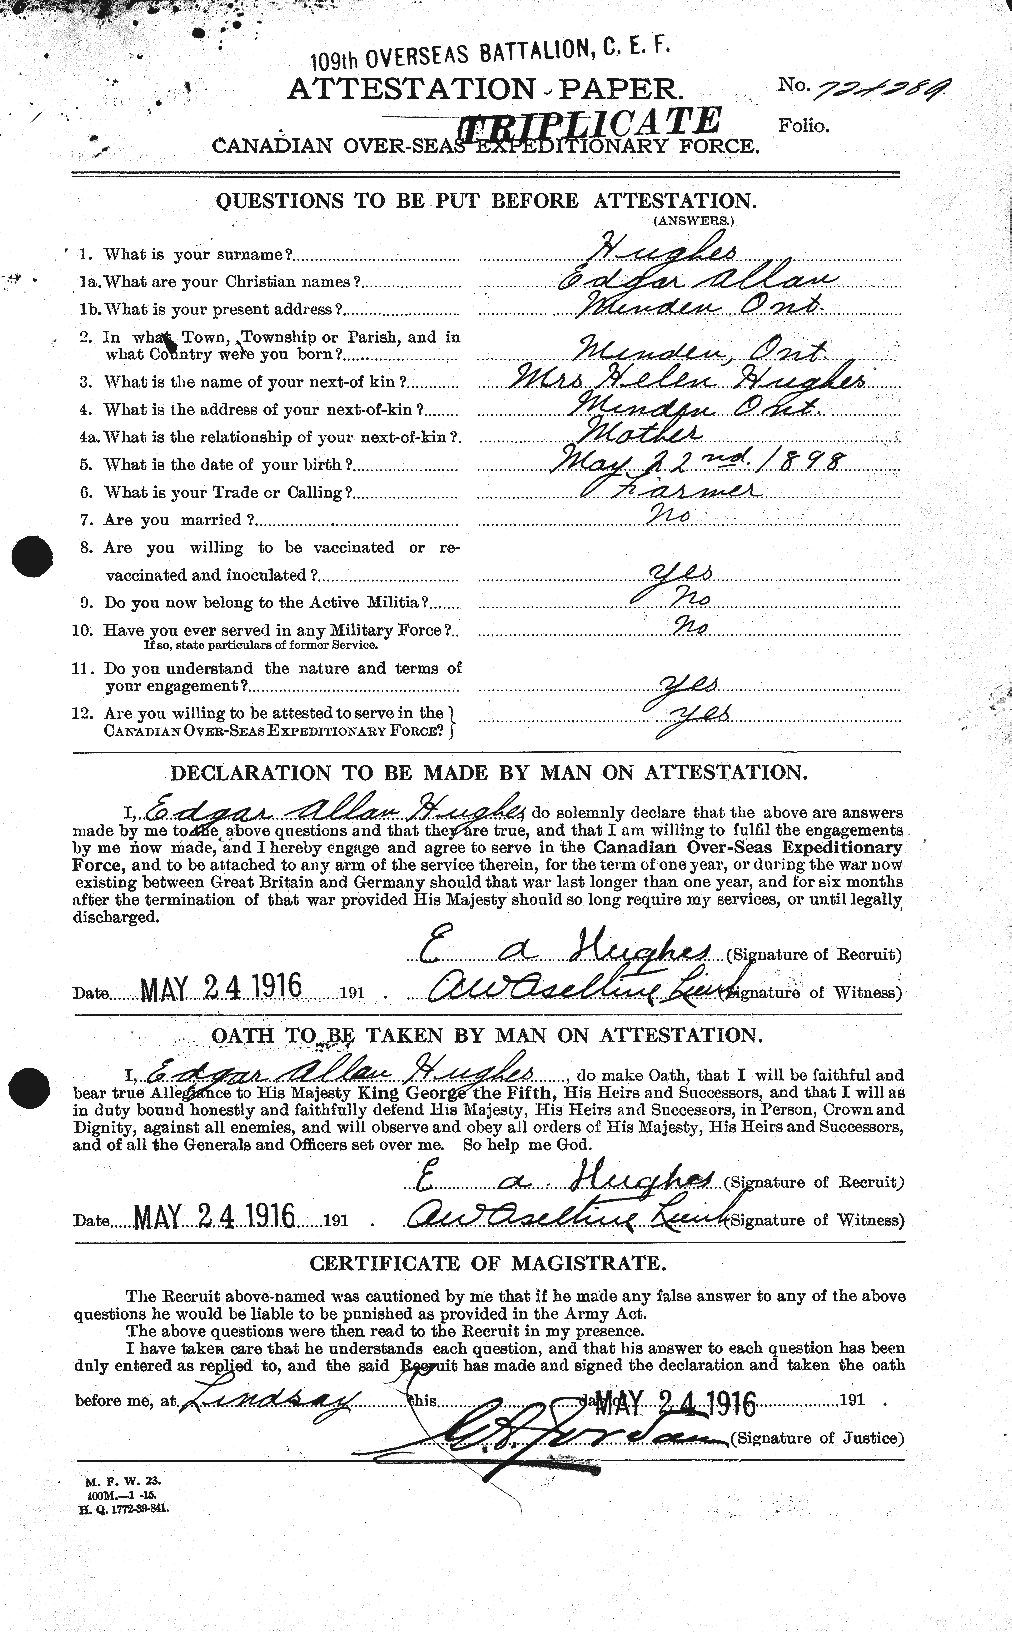 Personnel Records of the First World War - CEF 402658a